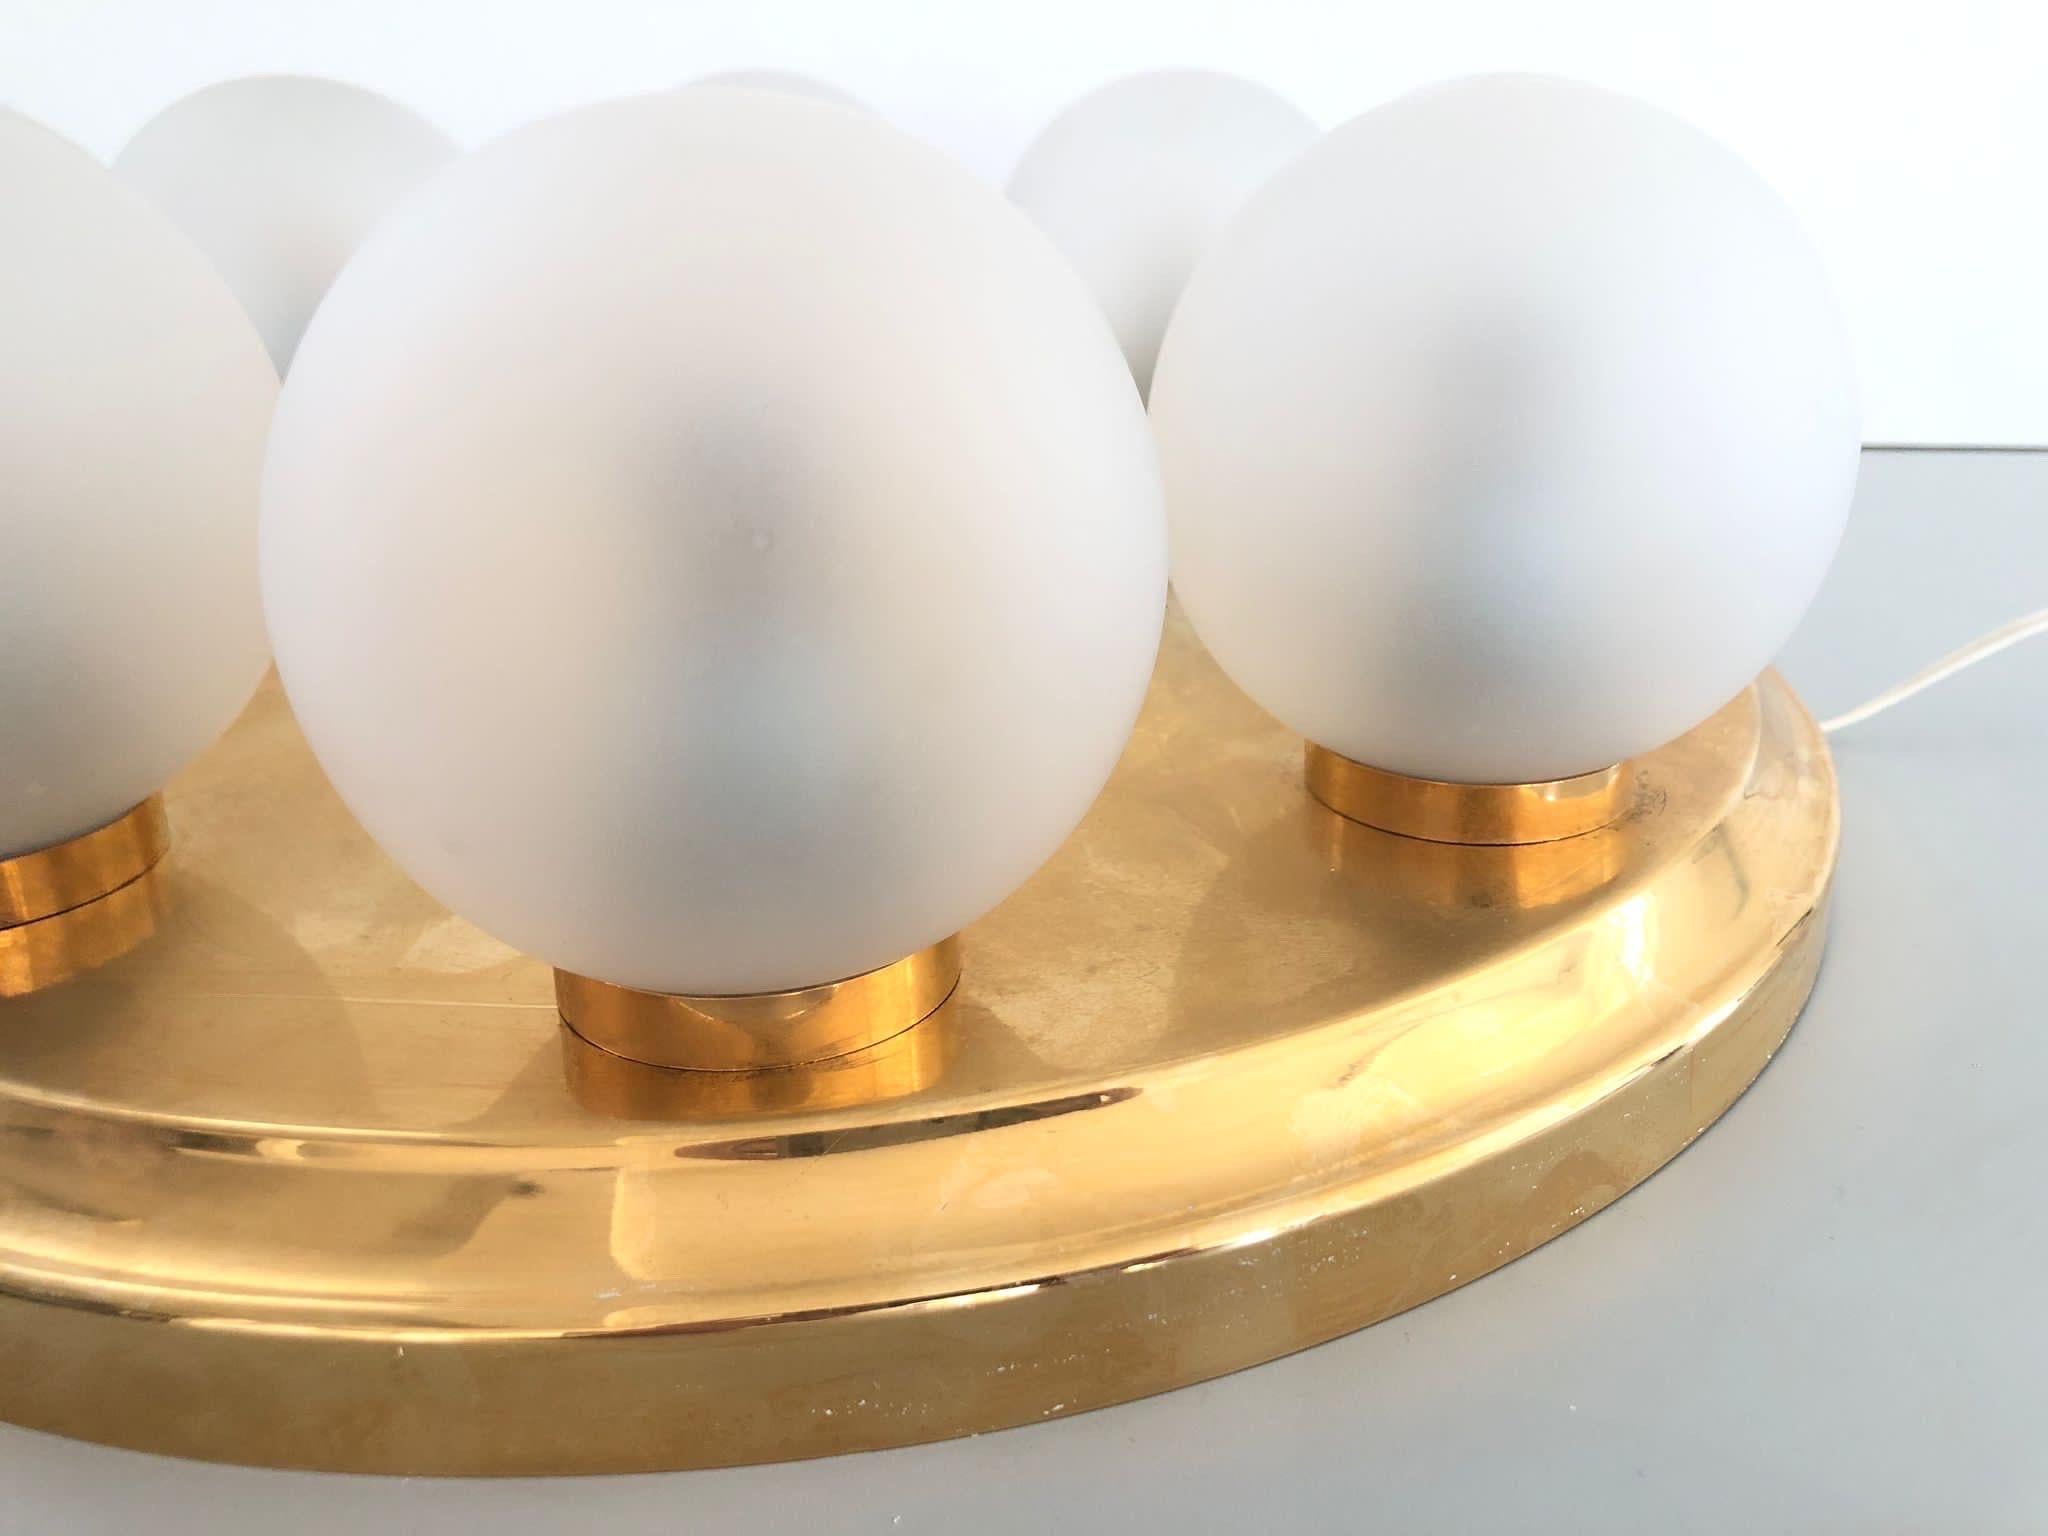 Atomic Age Gold Metal and 8 Ball Flush Mount Light by Kinkeldey, 1970s, Germany For Sale 2